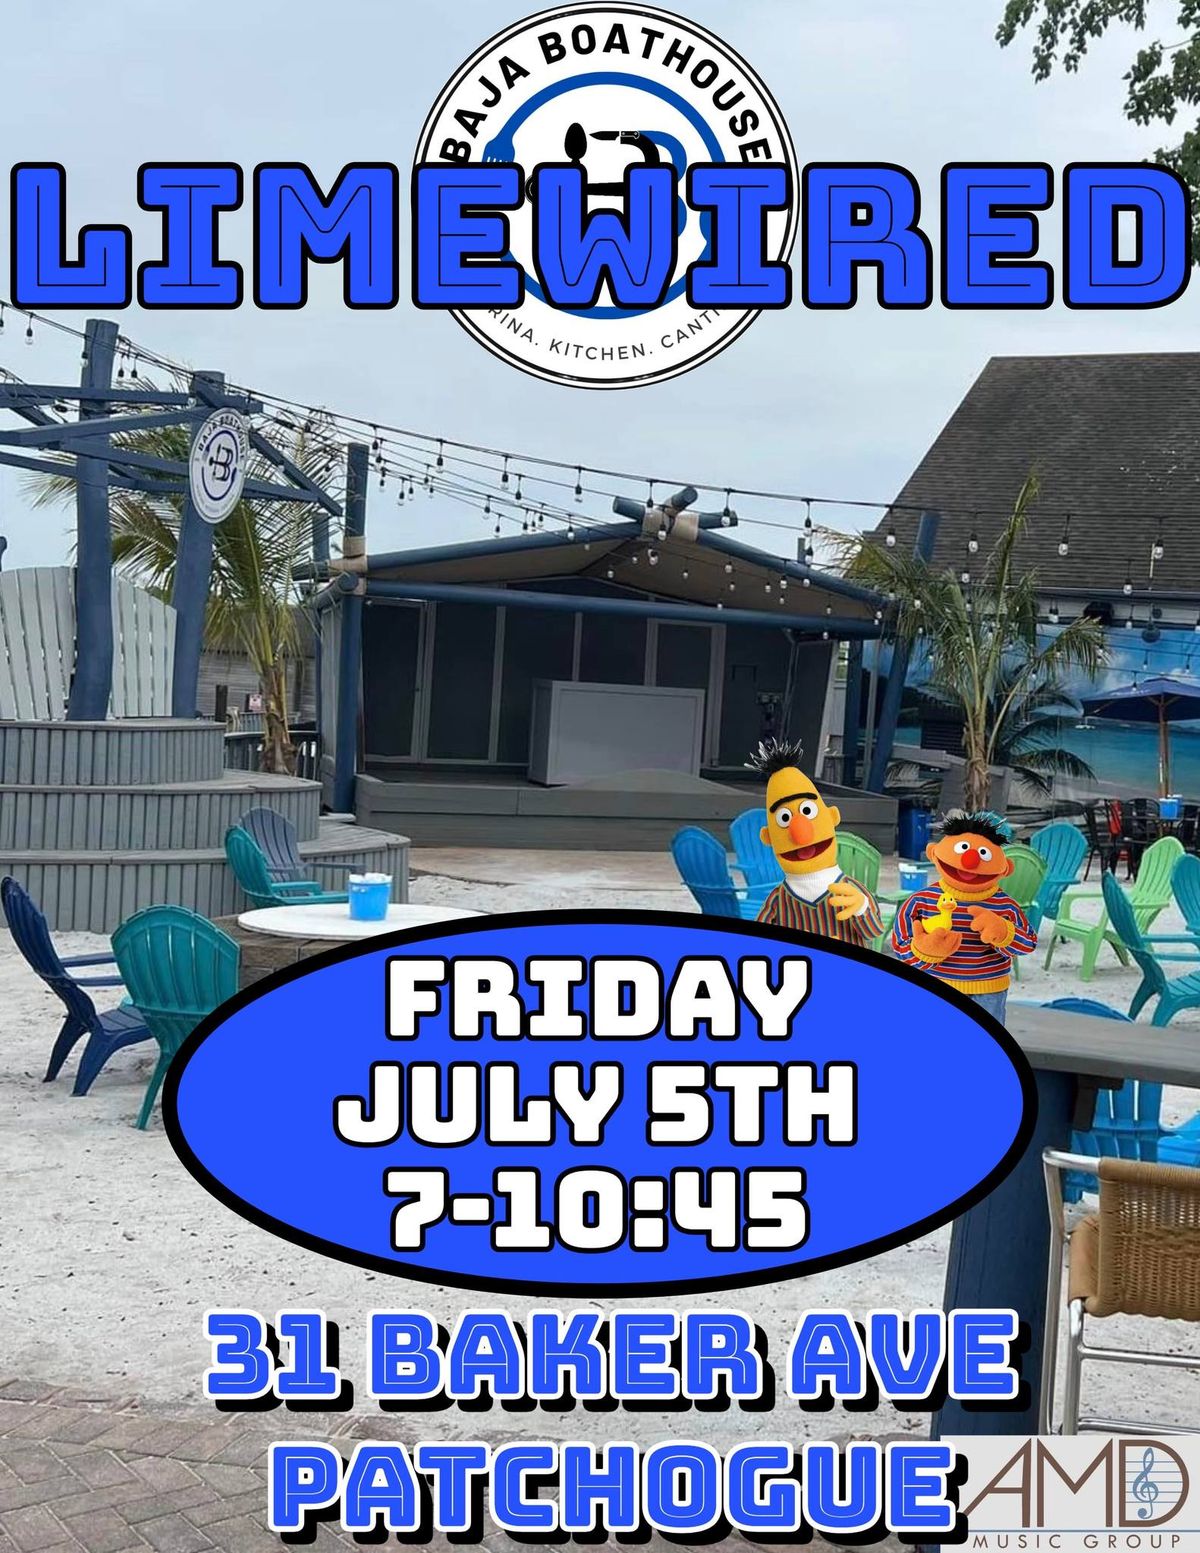 Limewired @ Baja Boathouse This Friday